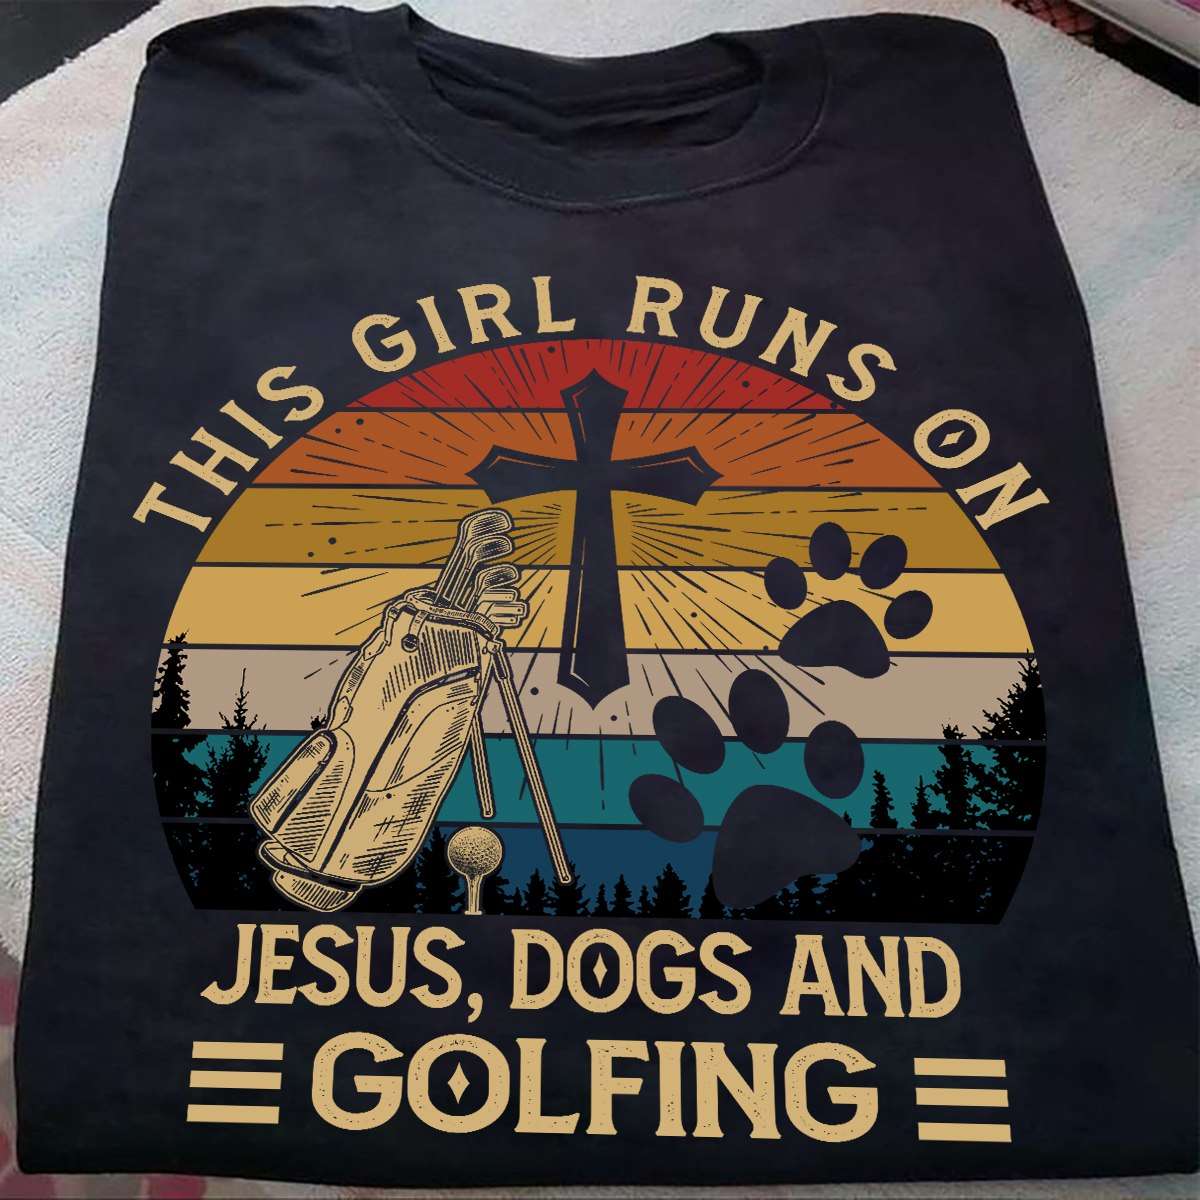 Dog And Golf Girl, Believe in Jesus - This girl runs on Jesus, dogs and golfing